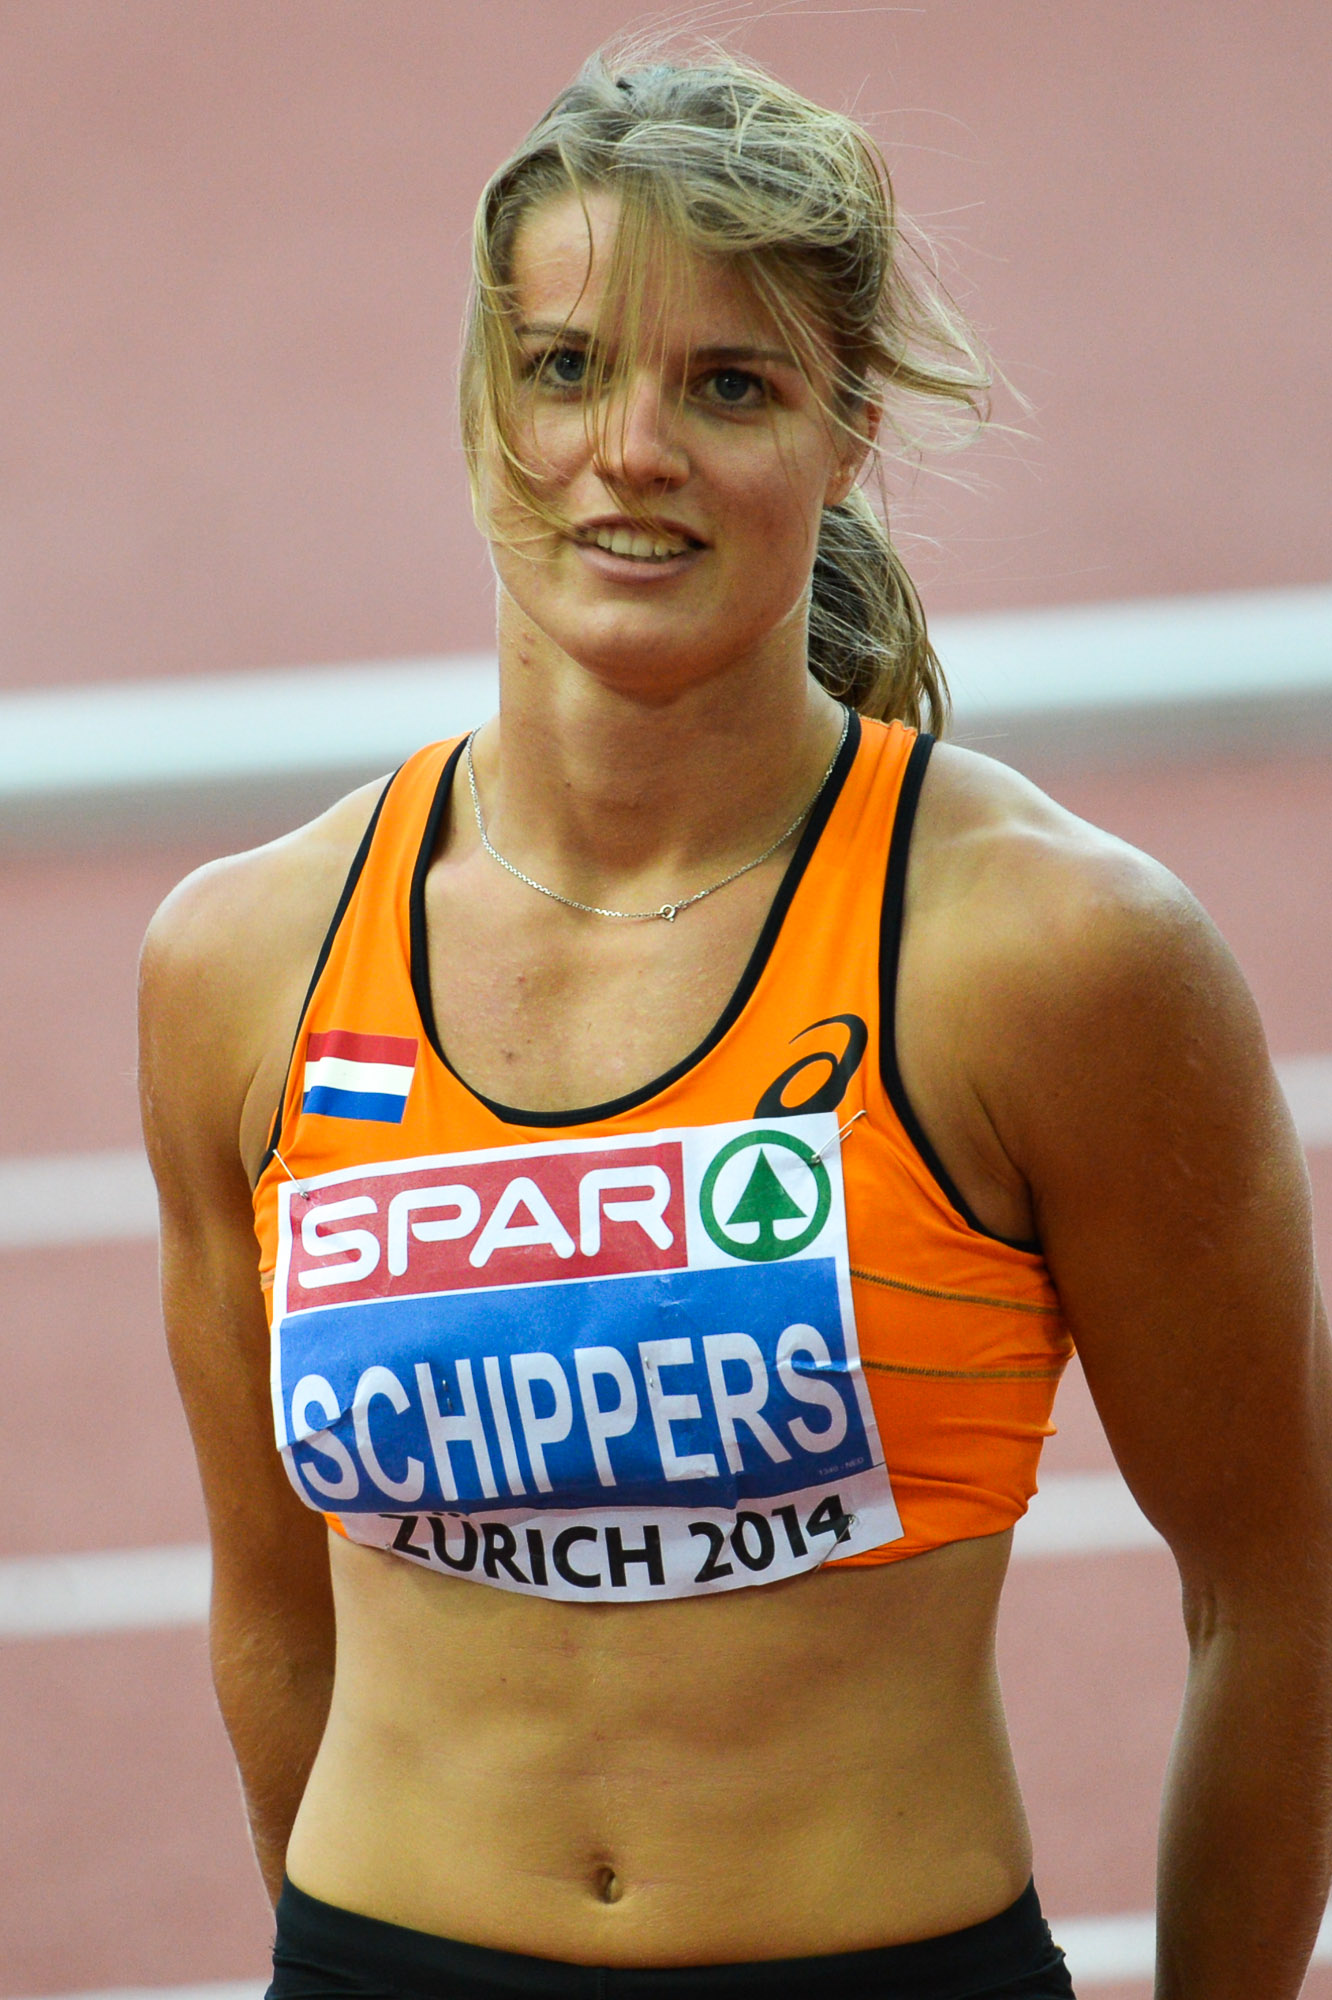 Dafne Schippers won the women's 100 and 200 metres